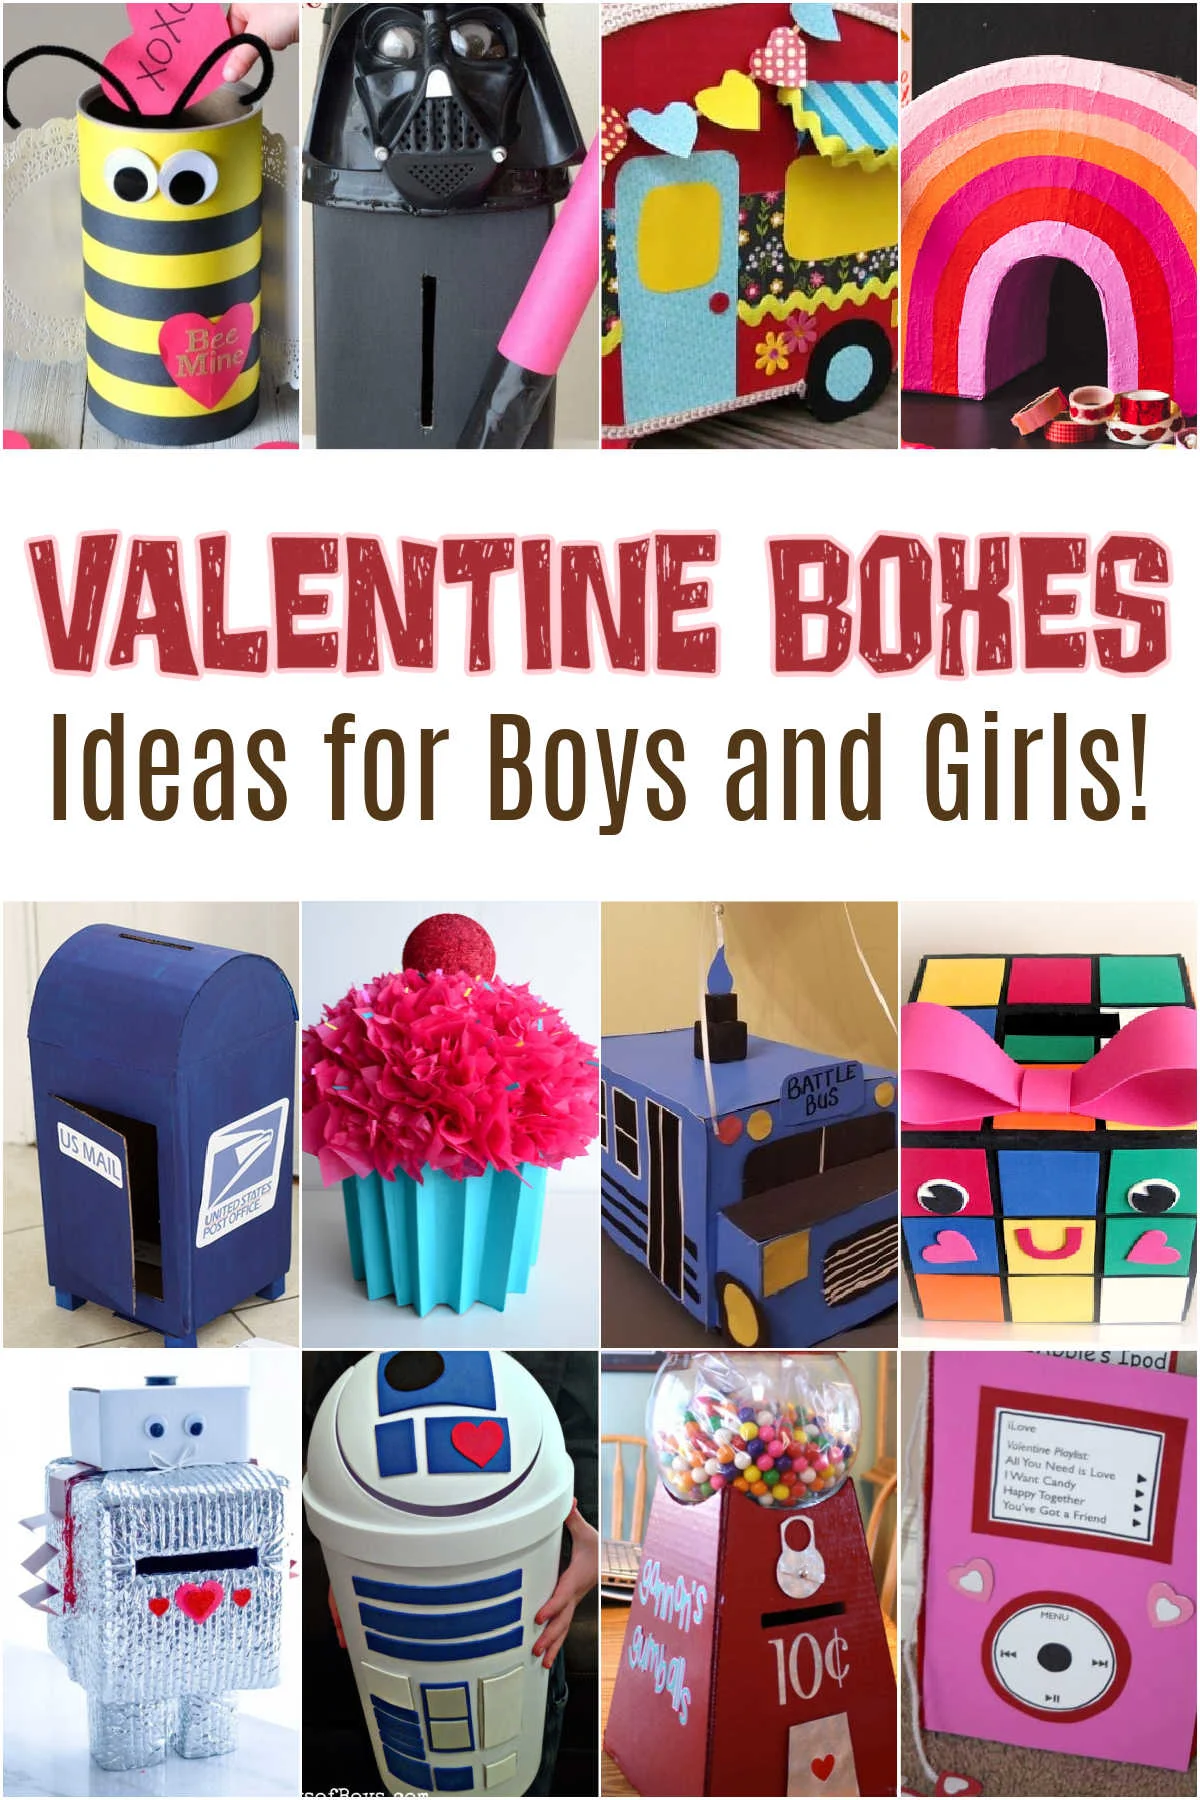 Collage of Valentine Box Idea for Boys and Girls